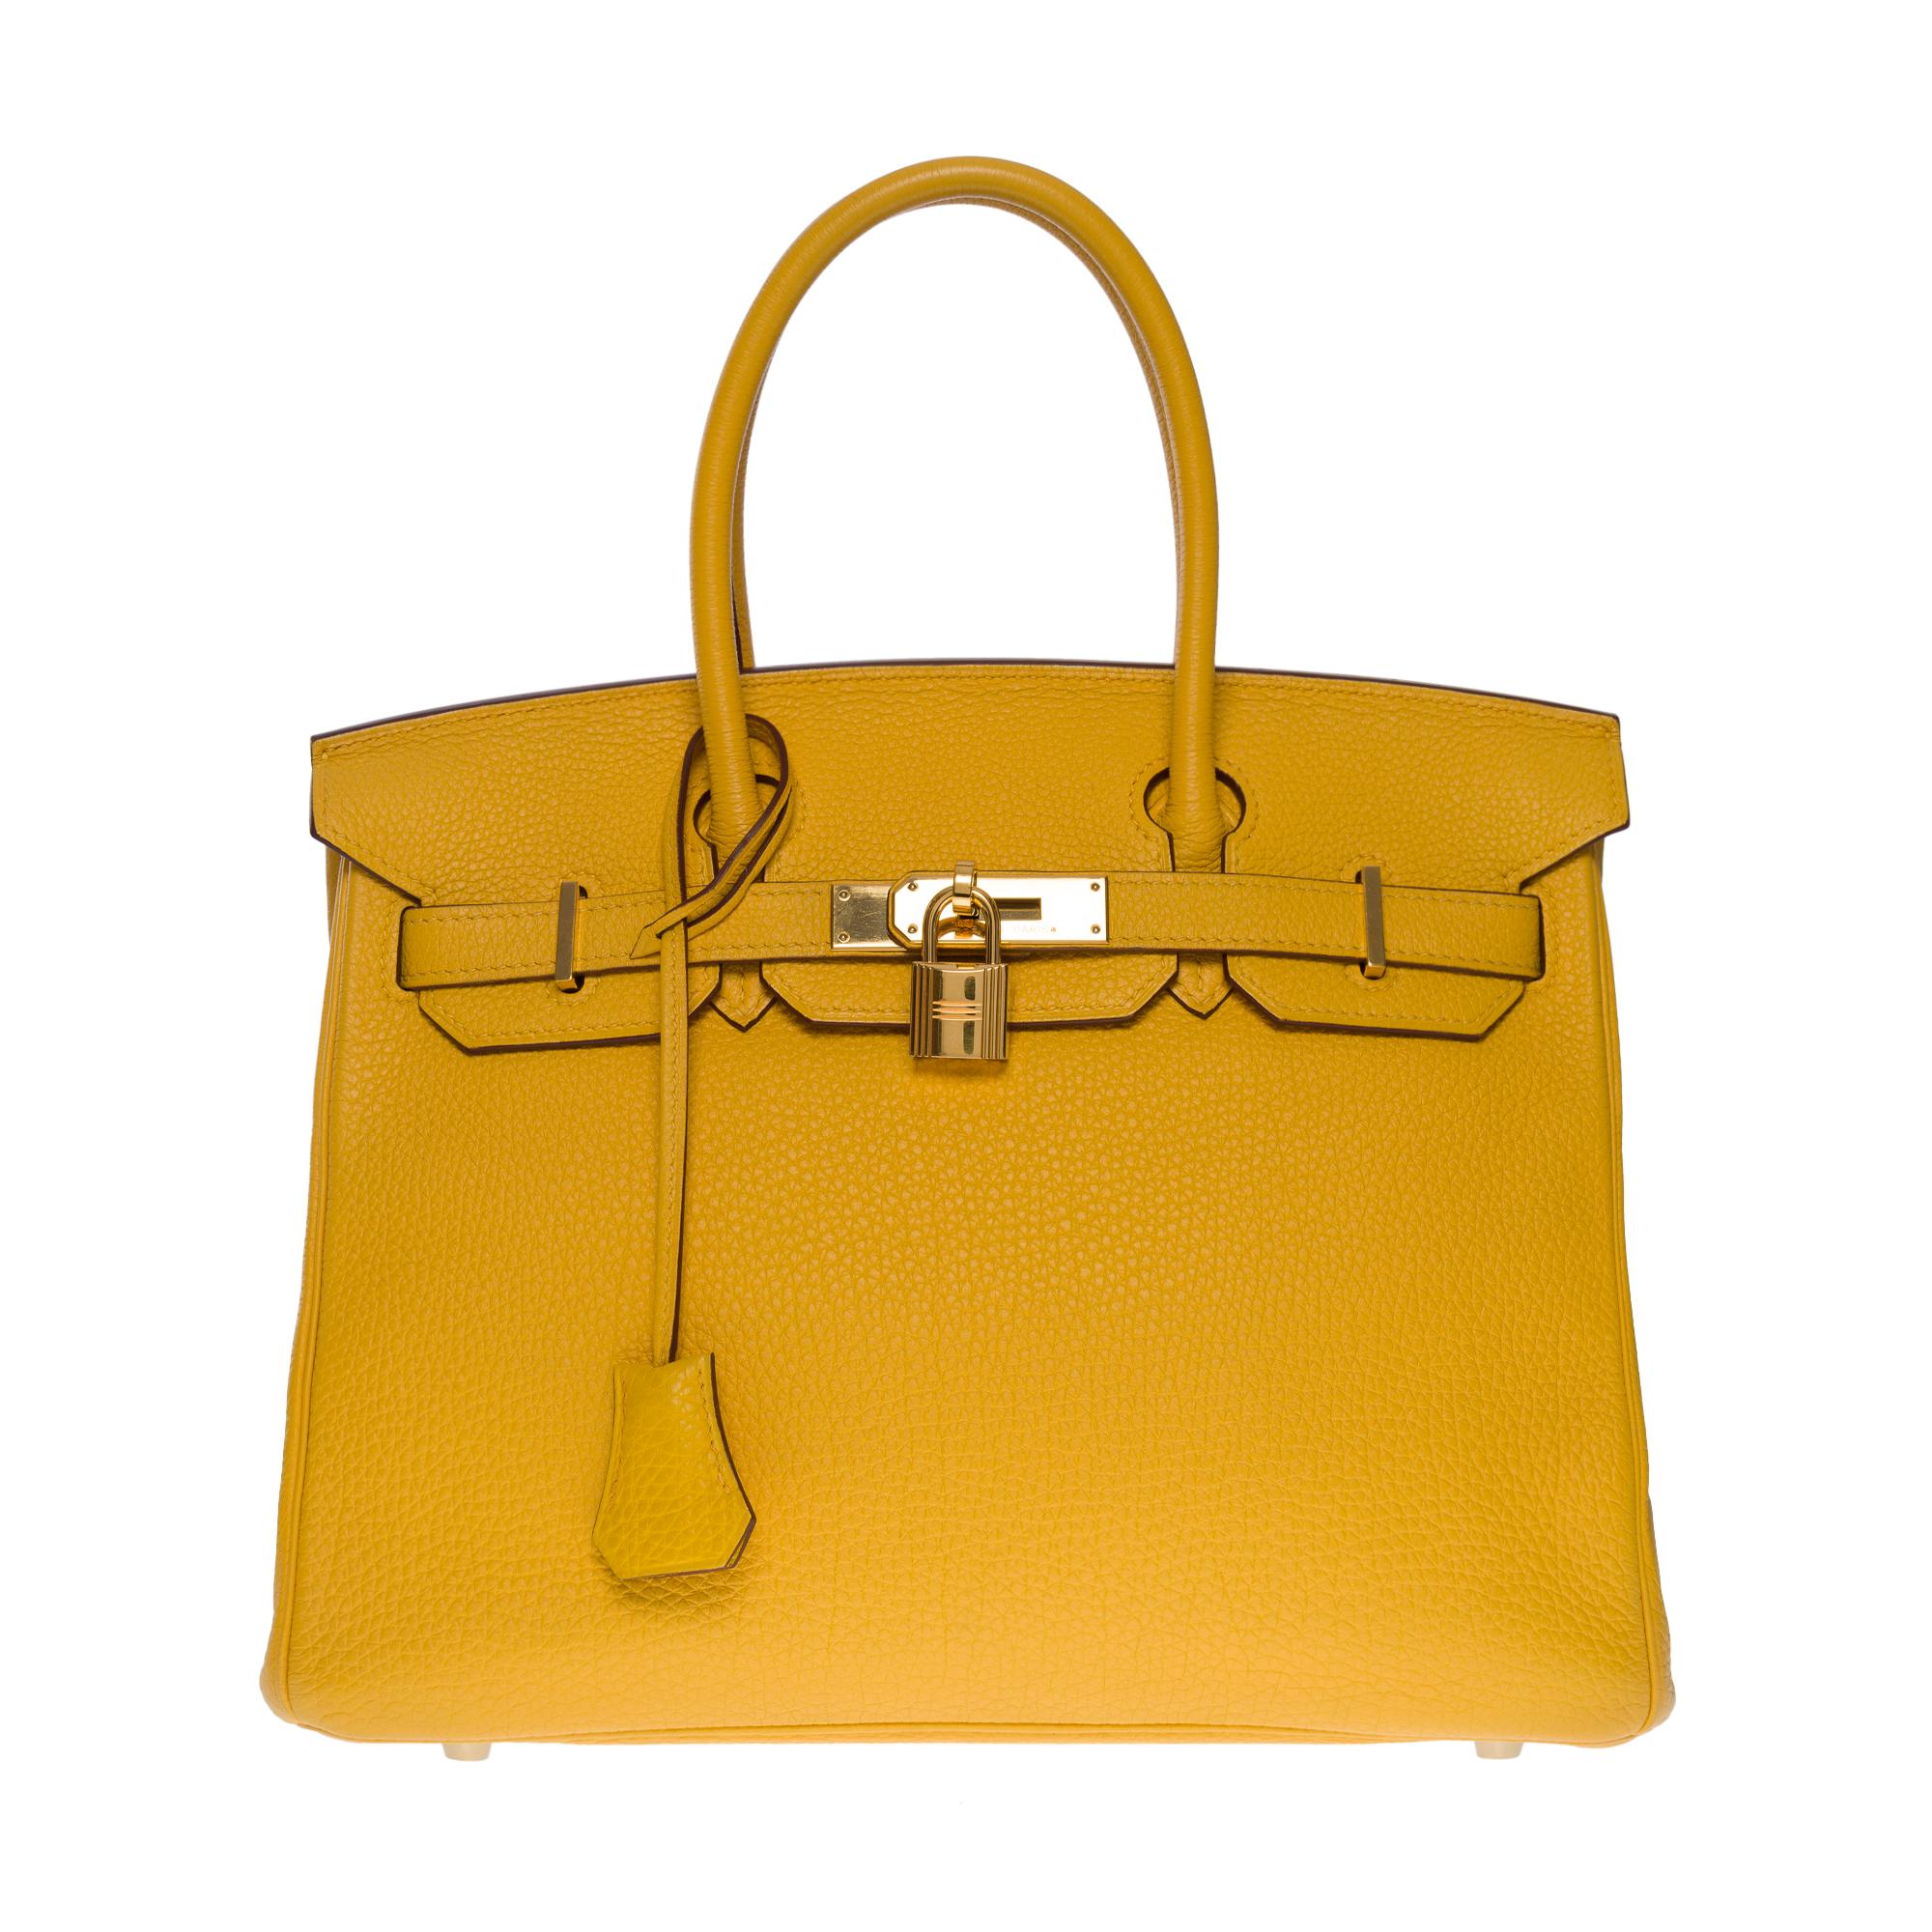 Exceptional & Bright Hermes Birkin 30 handbag in Yellow Togo leather, gold plated metal hardware, double yellow leather handle for hand carry

Flap closure
Yellow leather lining, one zippered pocket, one patch pocket
Signature: 